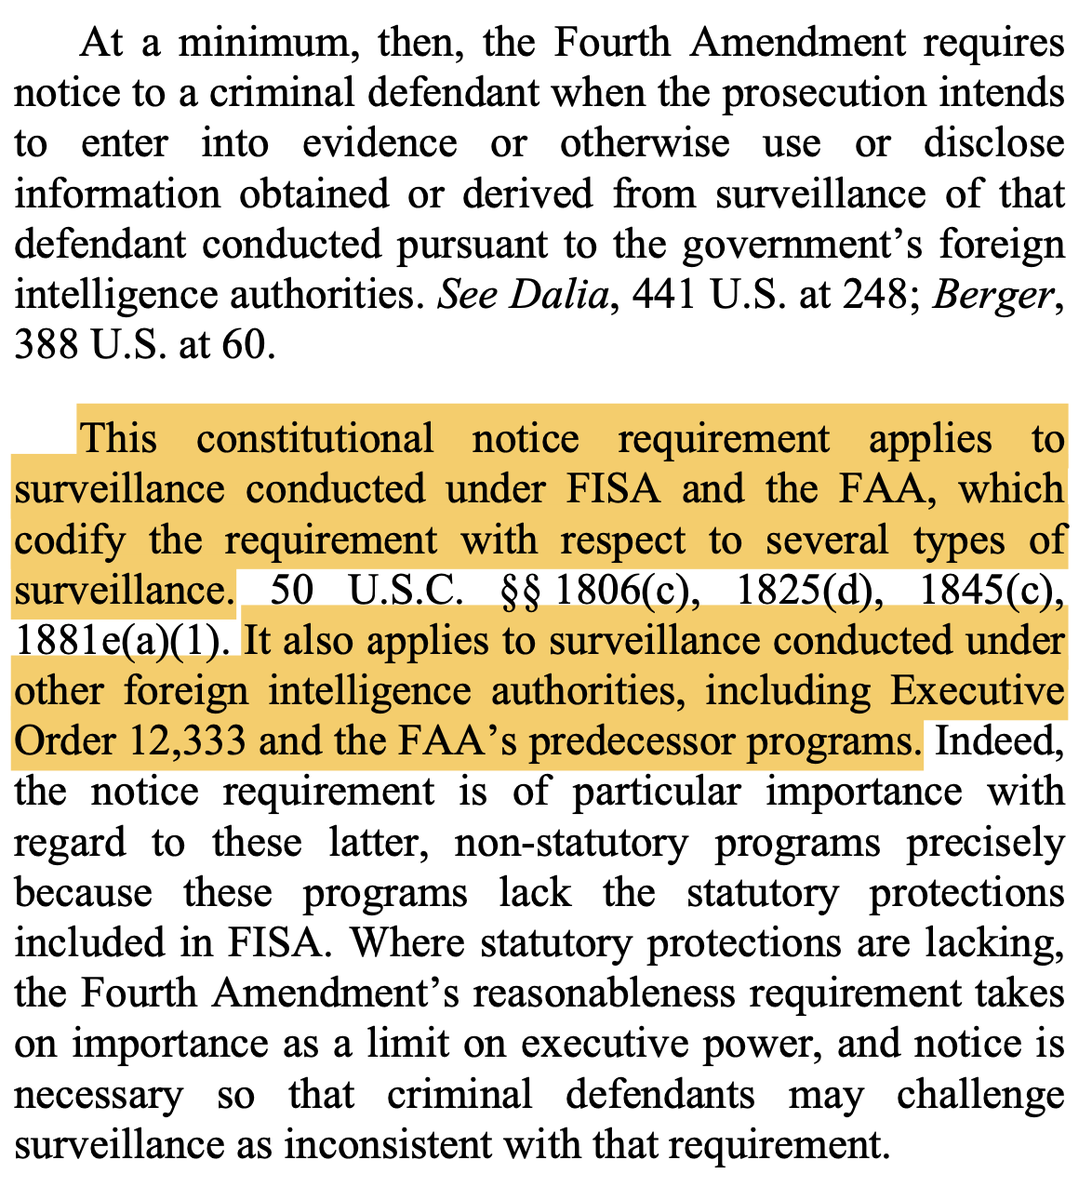 Fourth, the court held that the government must provide notice to criminal defendants prosecuted with evidence obtained or derived from NSA surveillance.